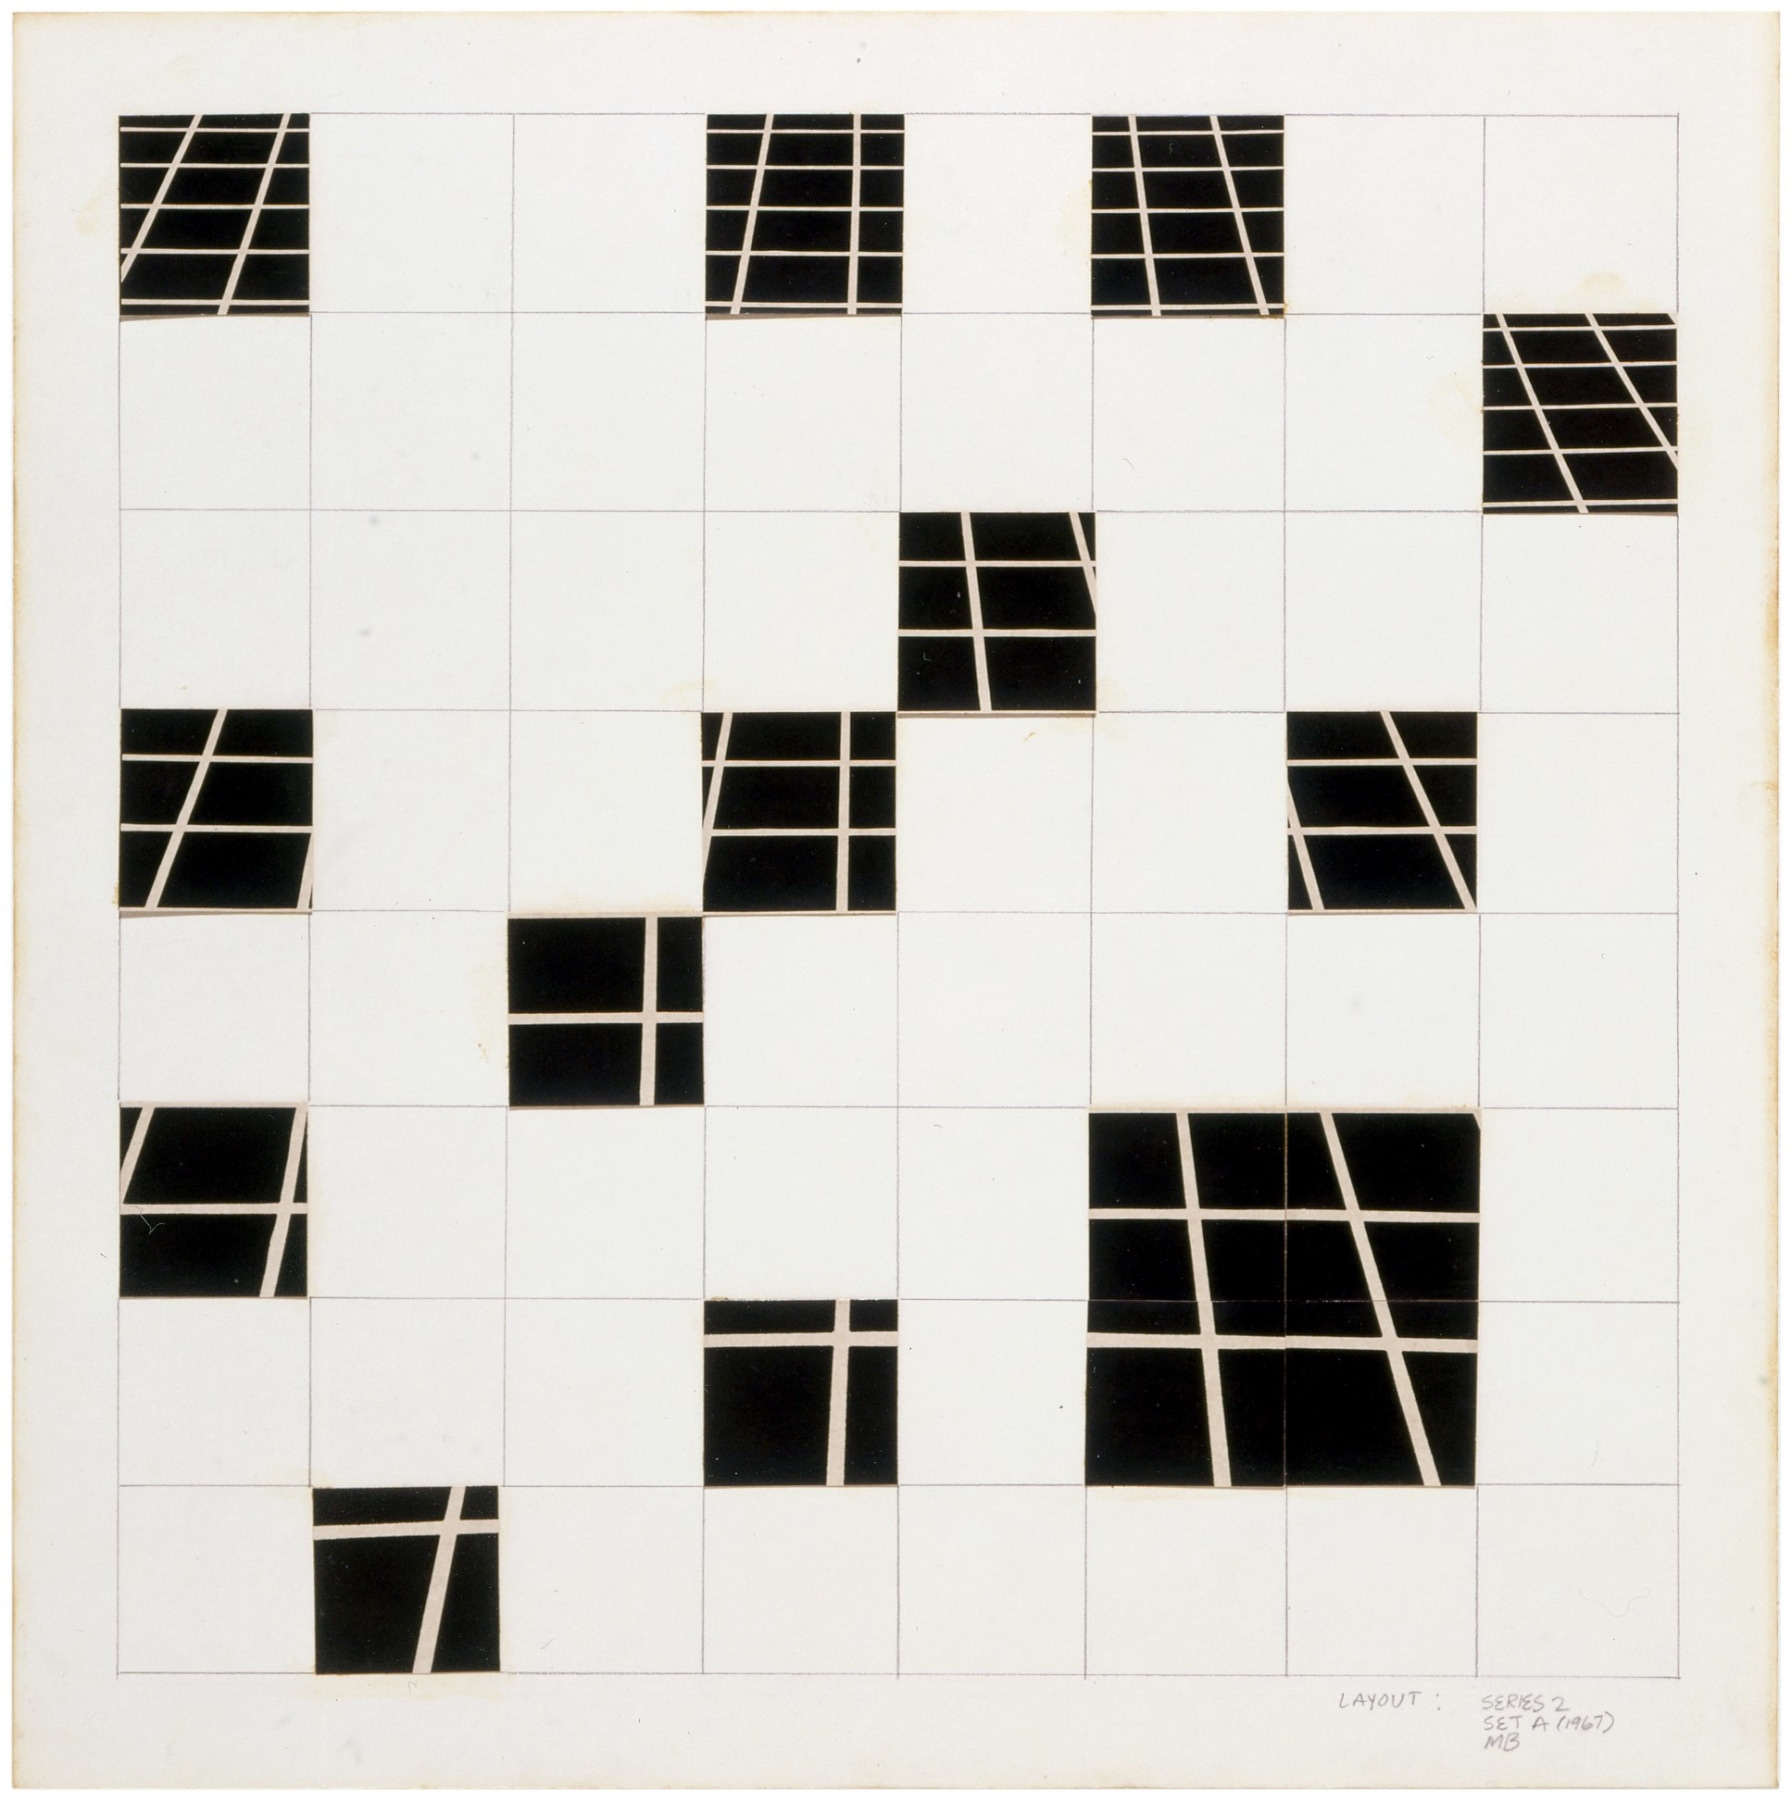 Mel Bochner,&nbsp;Dispersed Perspective (One Point), 1967. Photocollage and pencil on board, 17 x 17 inches.